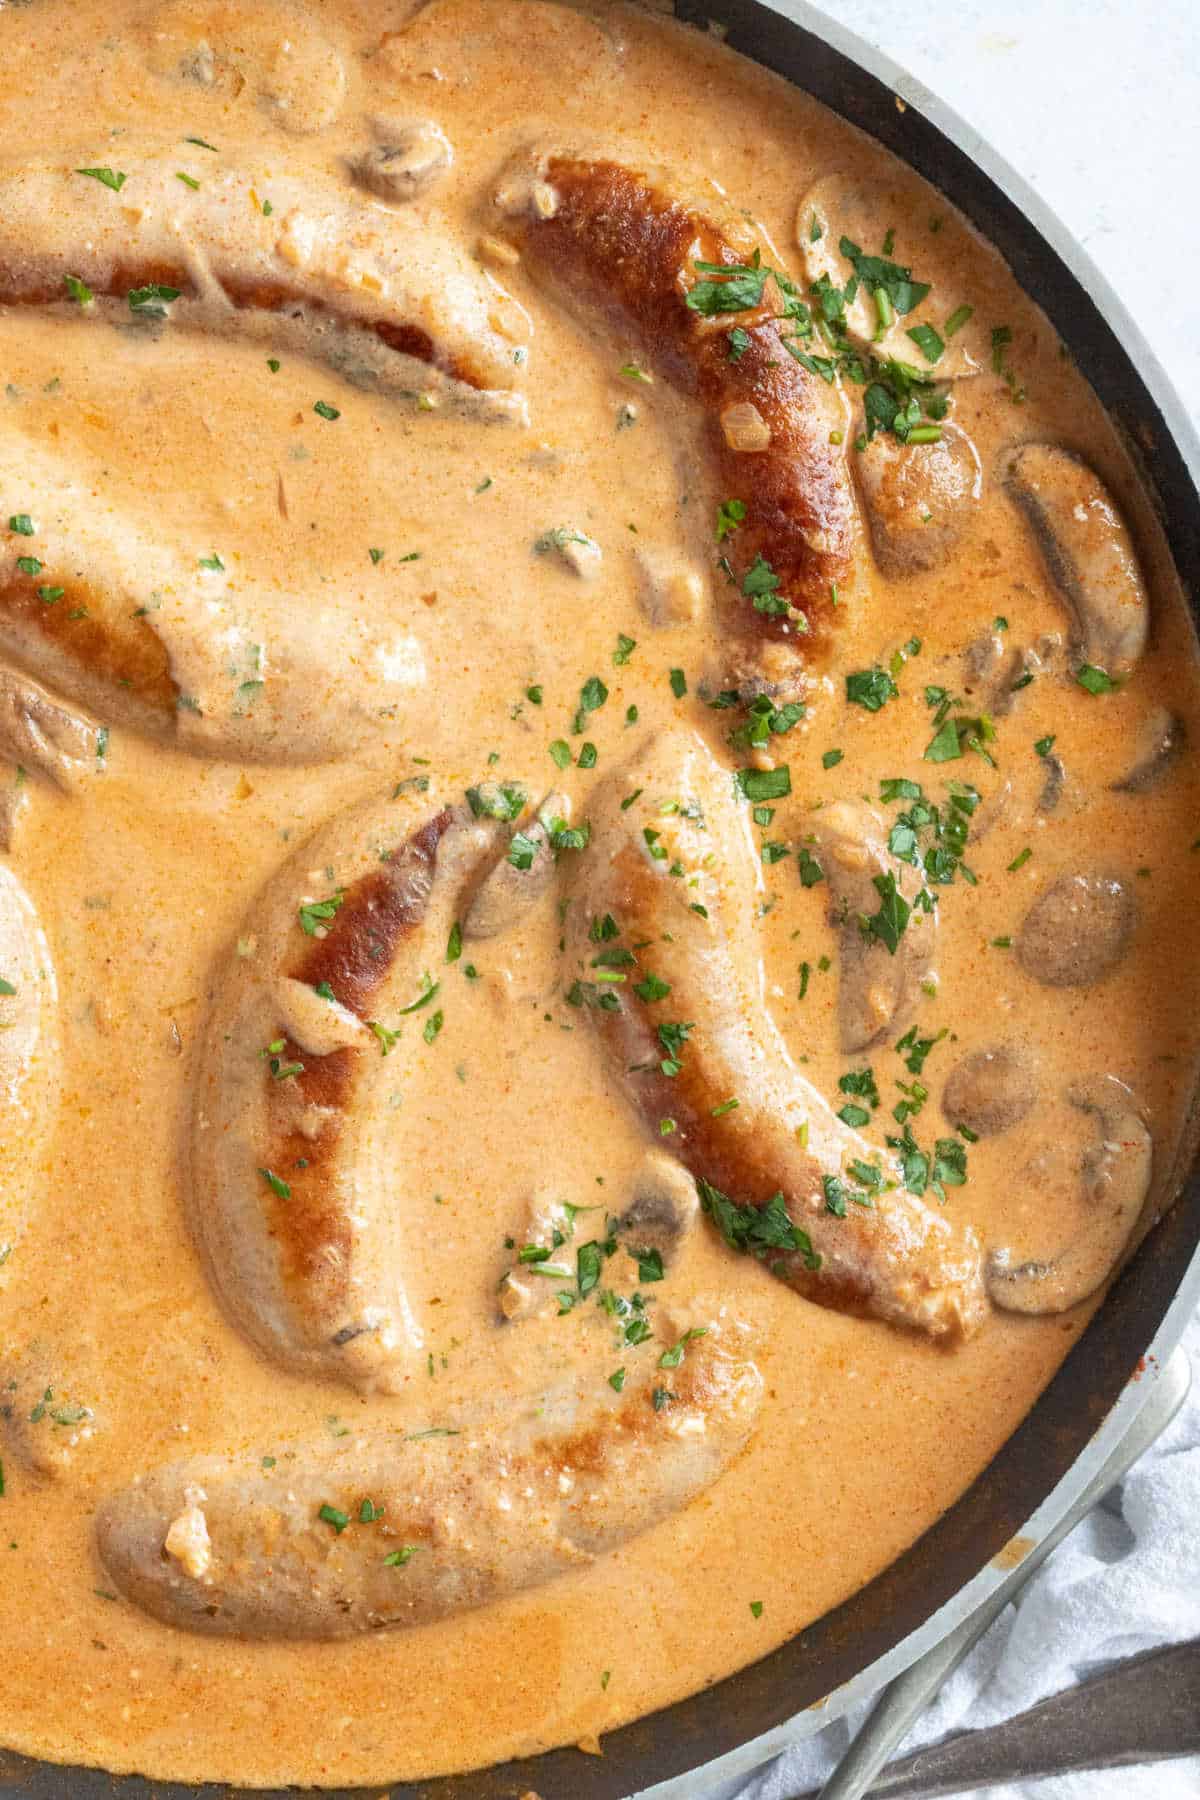 Sausages and mushroom stroganoff in a pan.